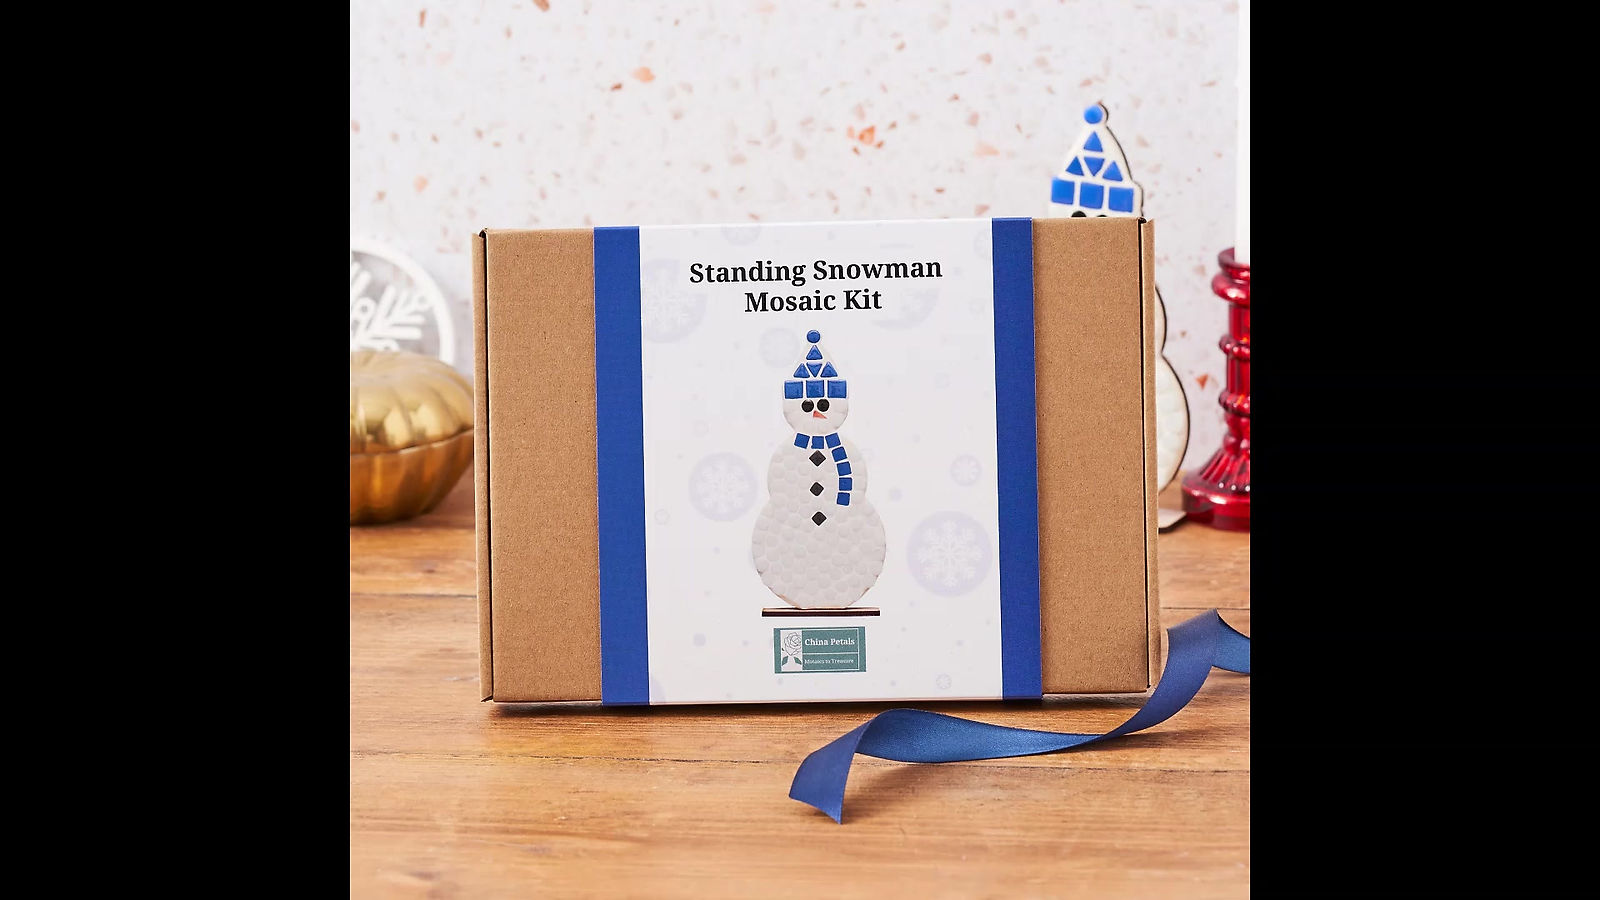 Standing Snowman Mosaic Kit How To Video